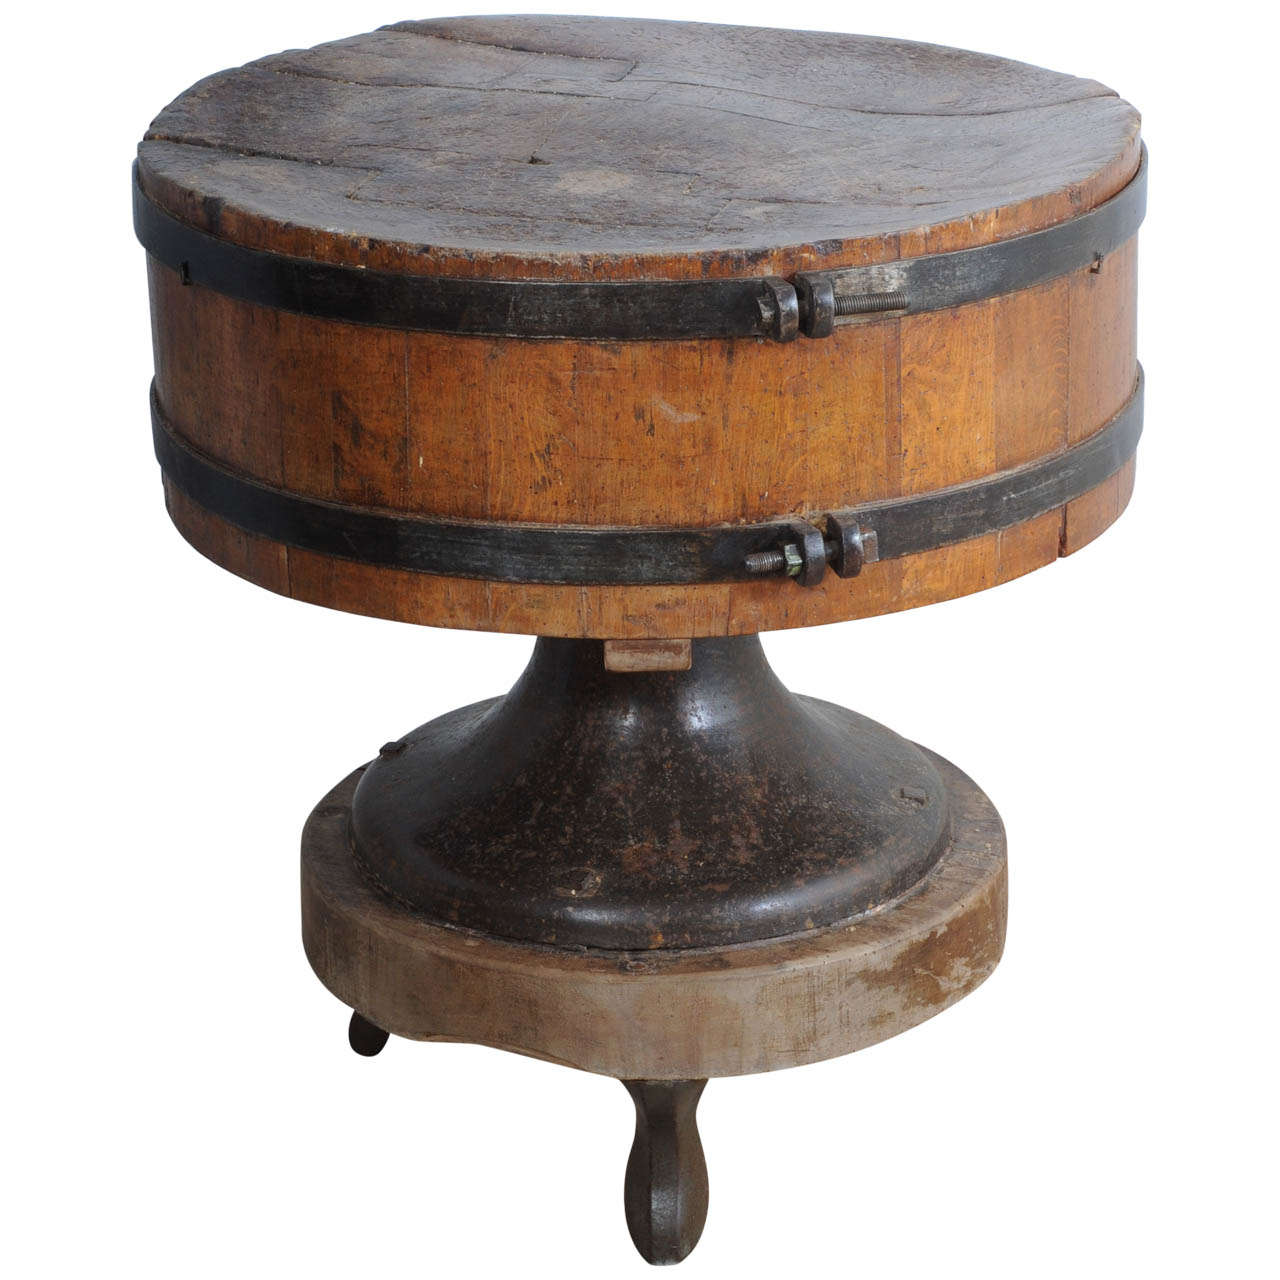 A Very Rare Round Wooden Butchers Block with Wrought-Iron Straps